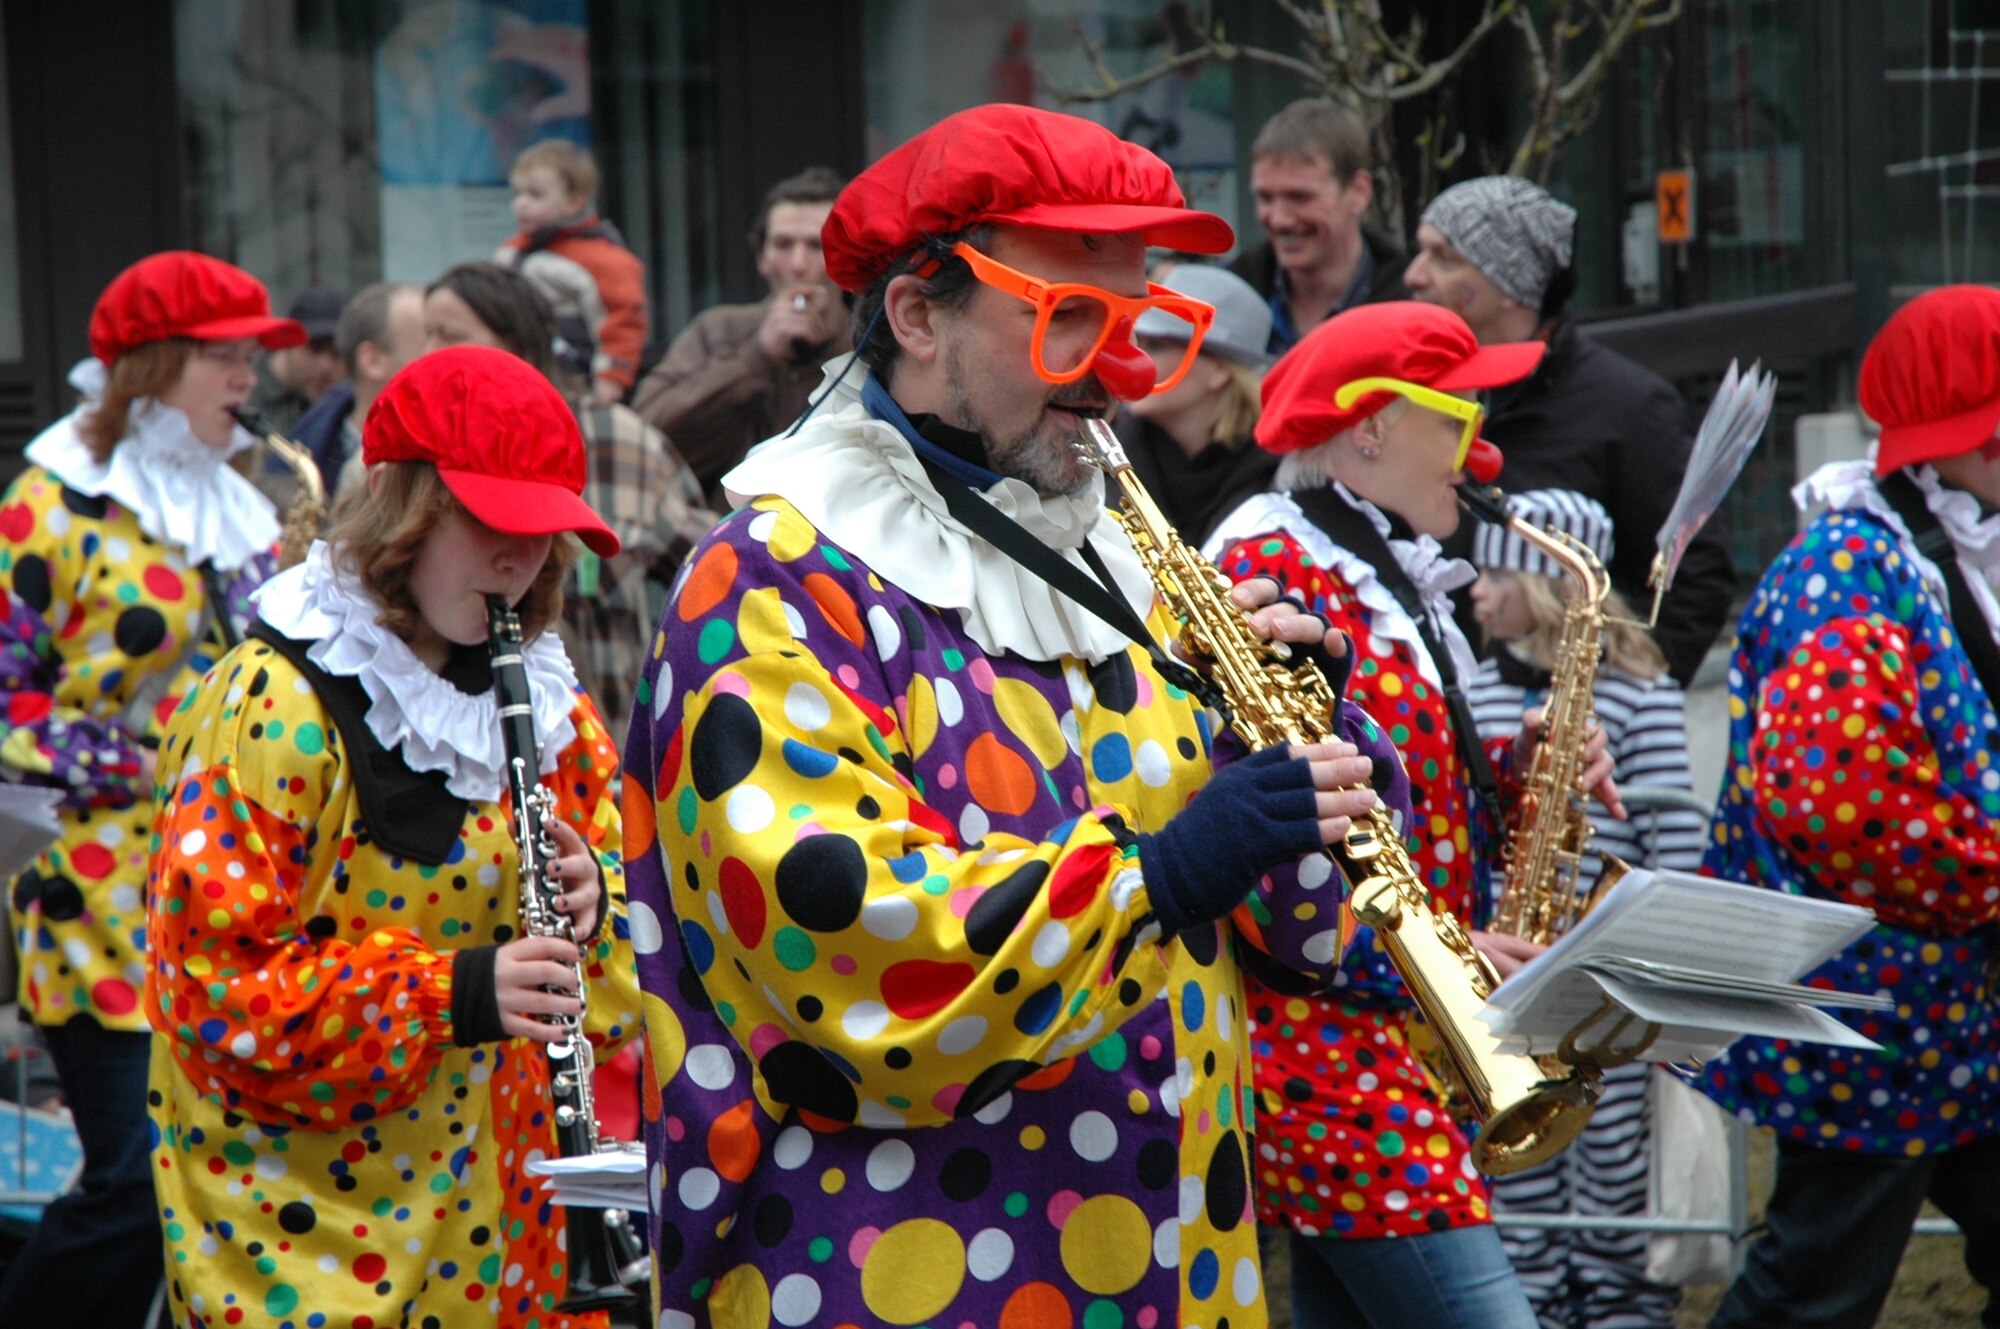 KORDEL, Germany -- A Trier music association dressed up as clowns at the Kordel fashing parade Feb. 22, 2009. Observers not only enjoyed their colorful outfits but also sang loud to popular fasching tunes, played by this orchestra. (U.S. Air Force photo by Iris Reiff)